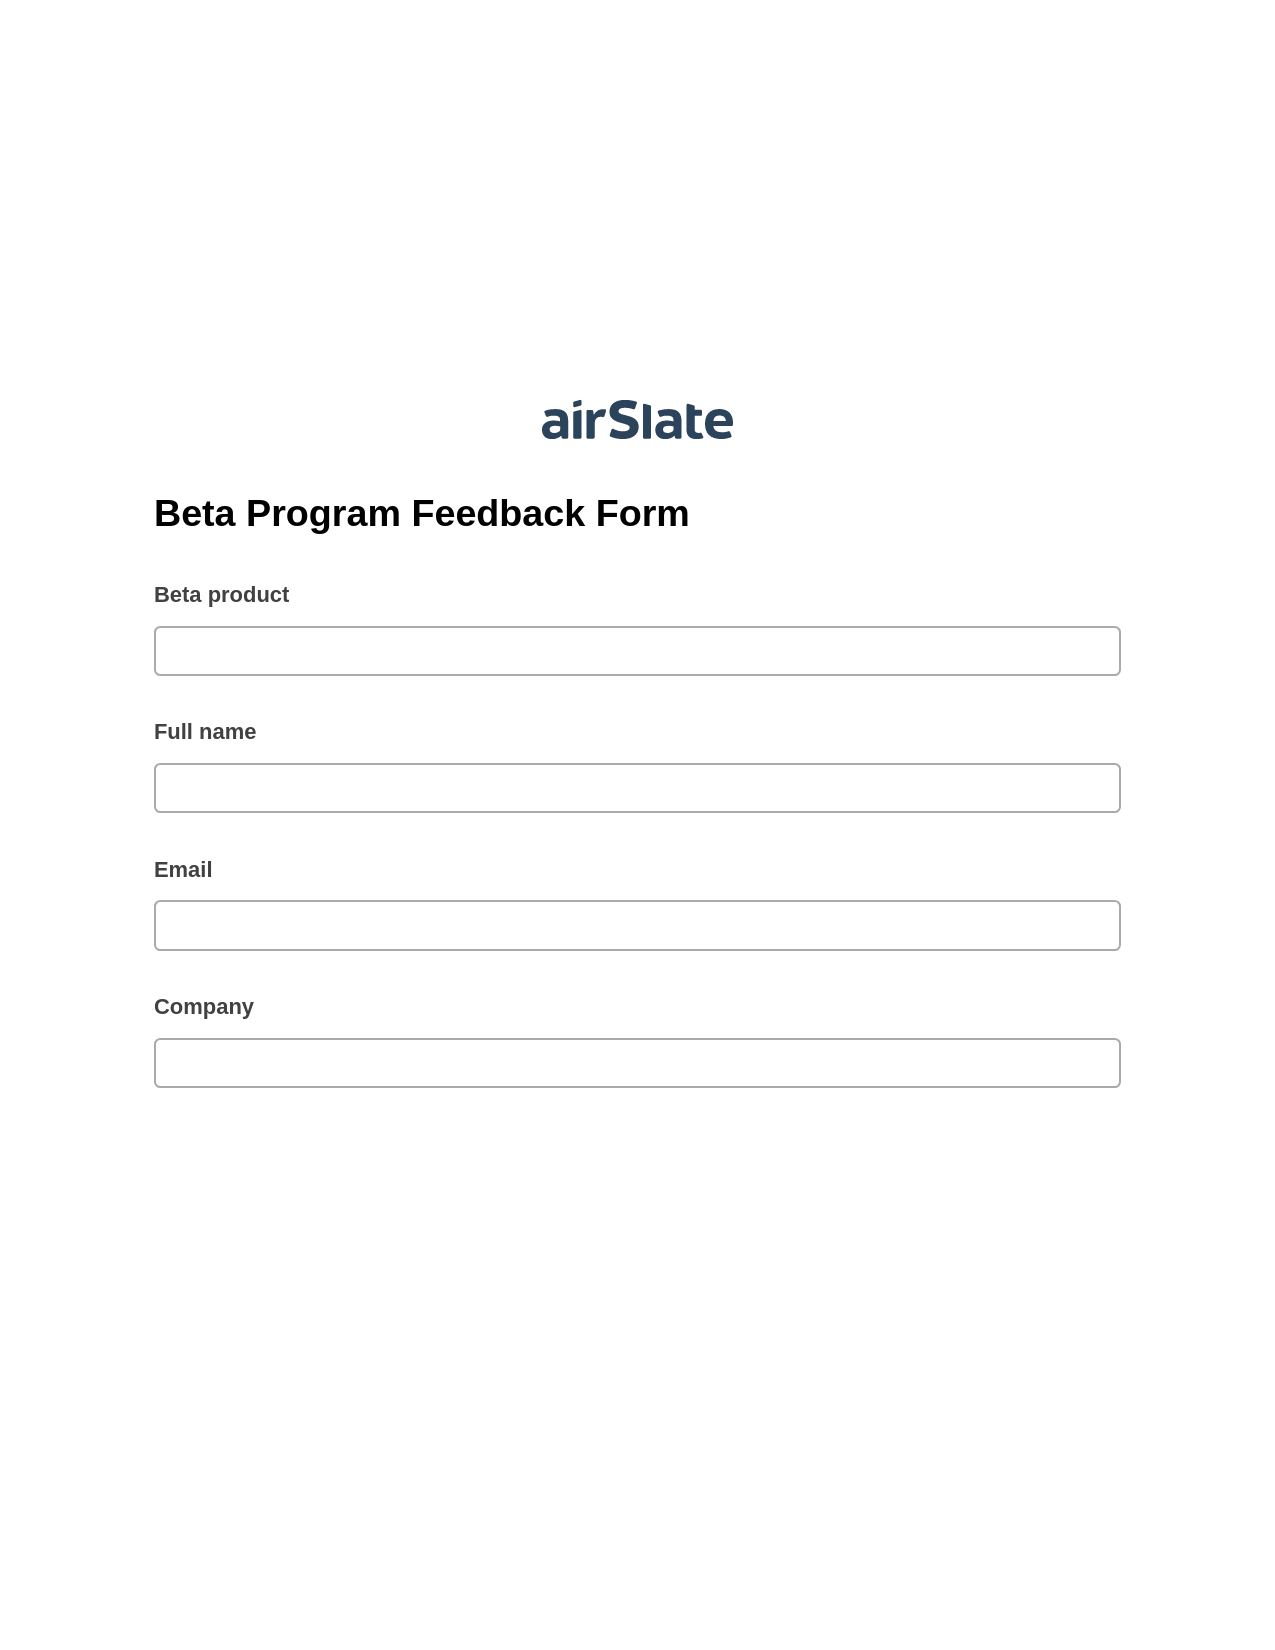 Beta Program Feedback Form Pre-fill Dropdowns from MySQL Bot, Open as Role Bot, Export to Excel 365 Bot